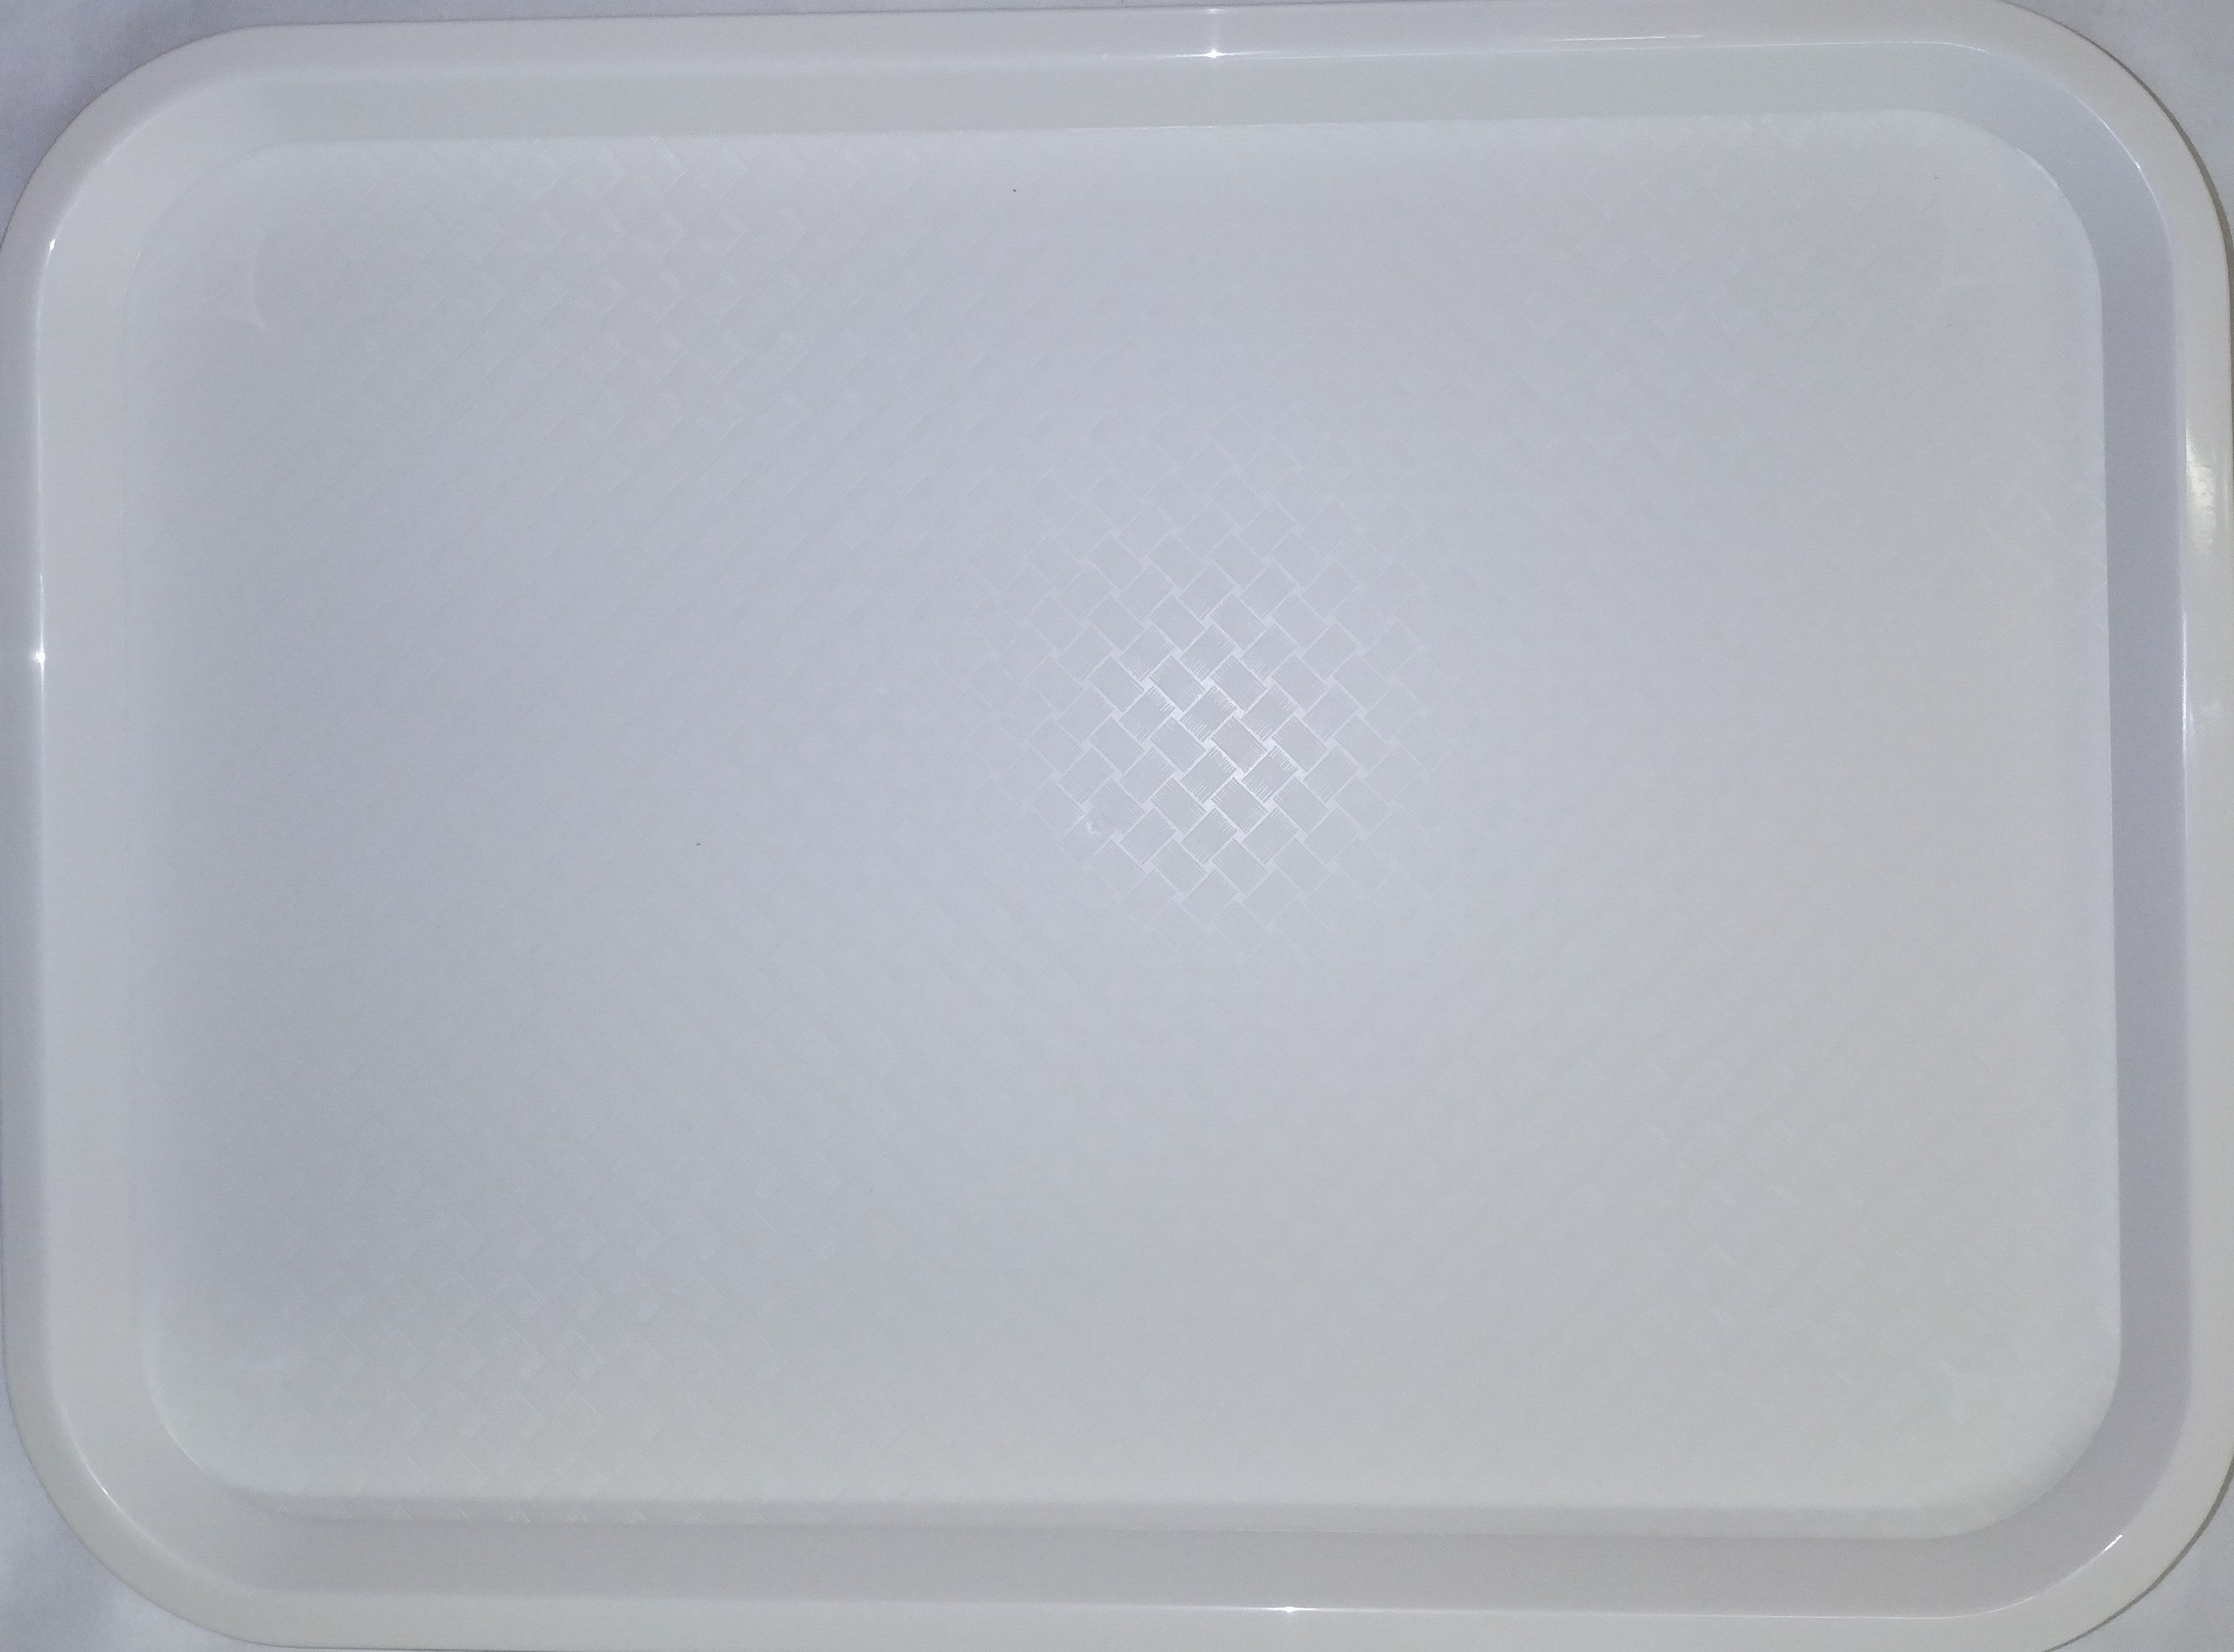 Tray White 30 x 40cm Cater-Rax H/Duty